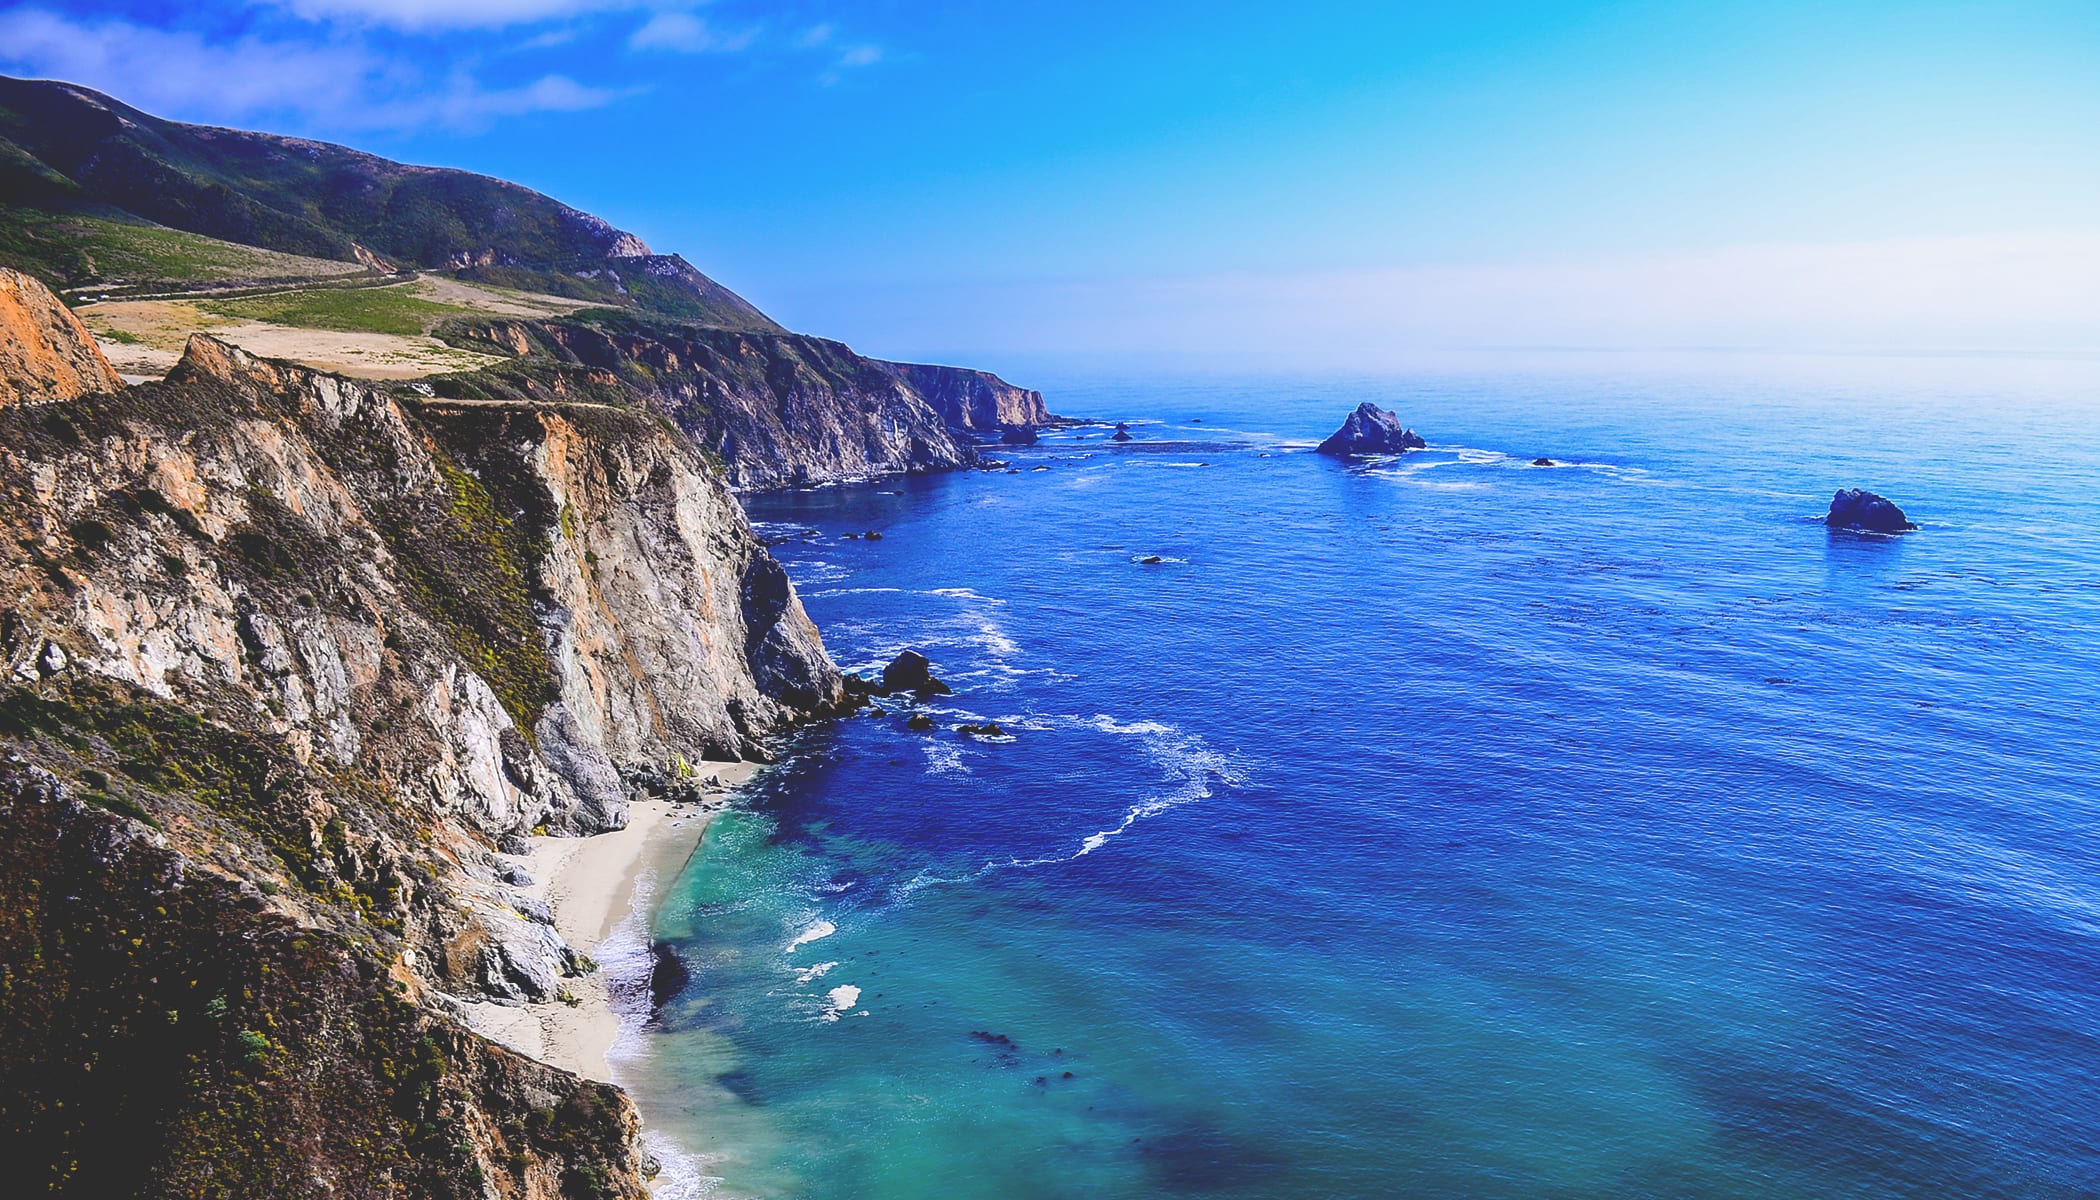 Coastline near Point Conception, California with ocean and cliffs